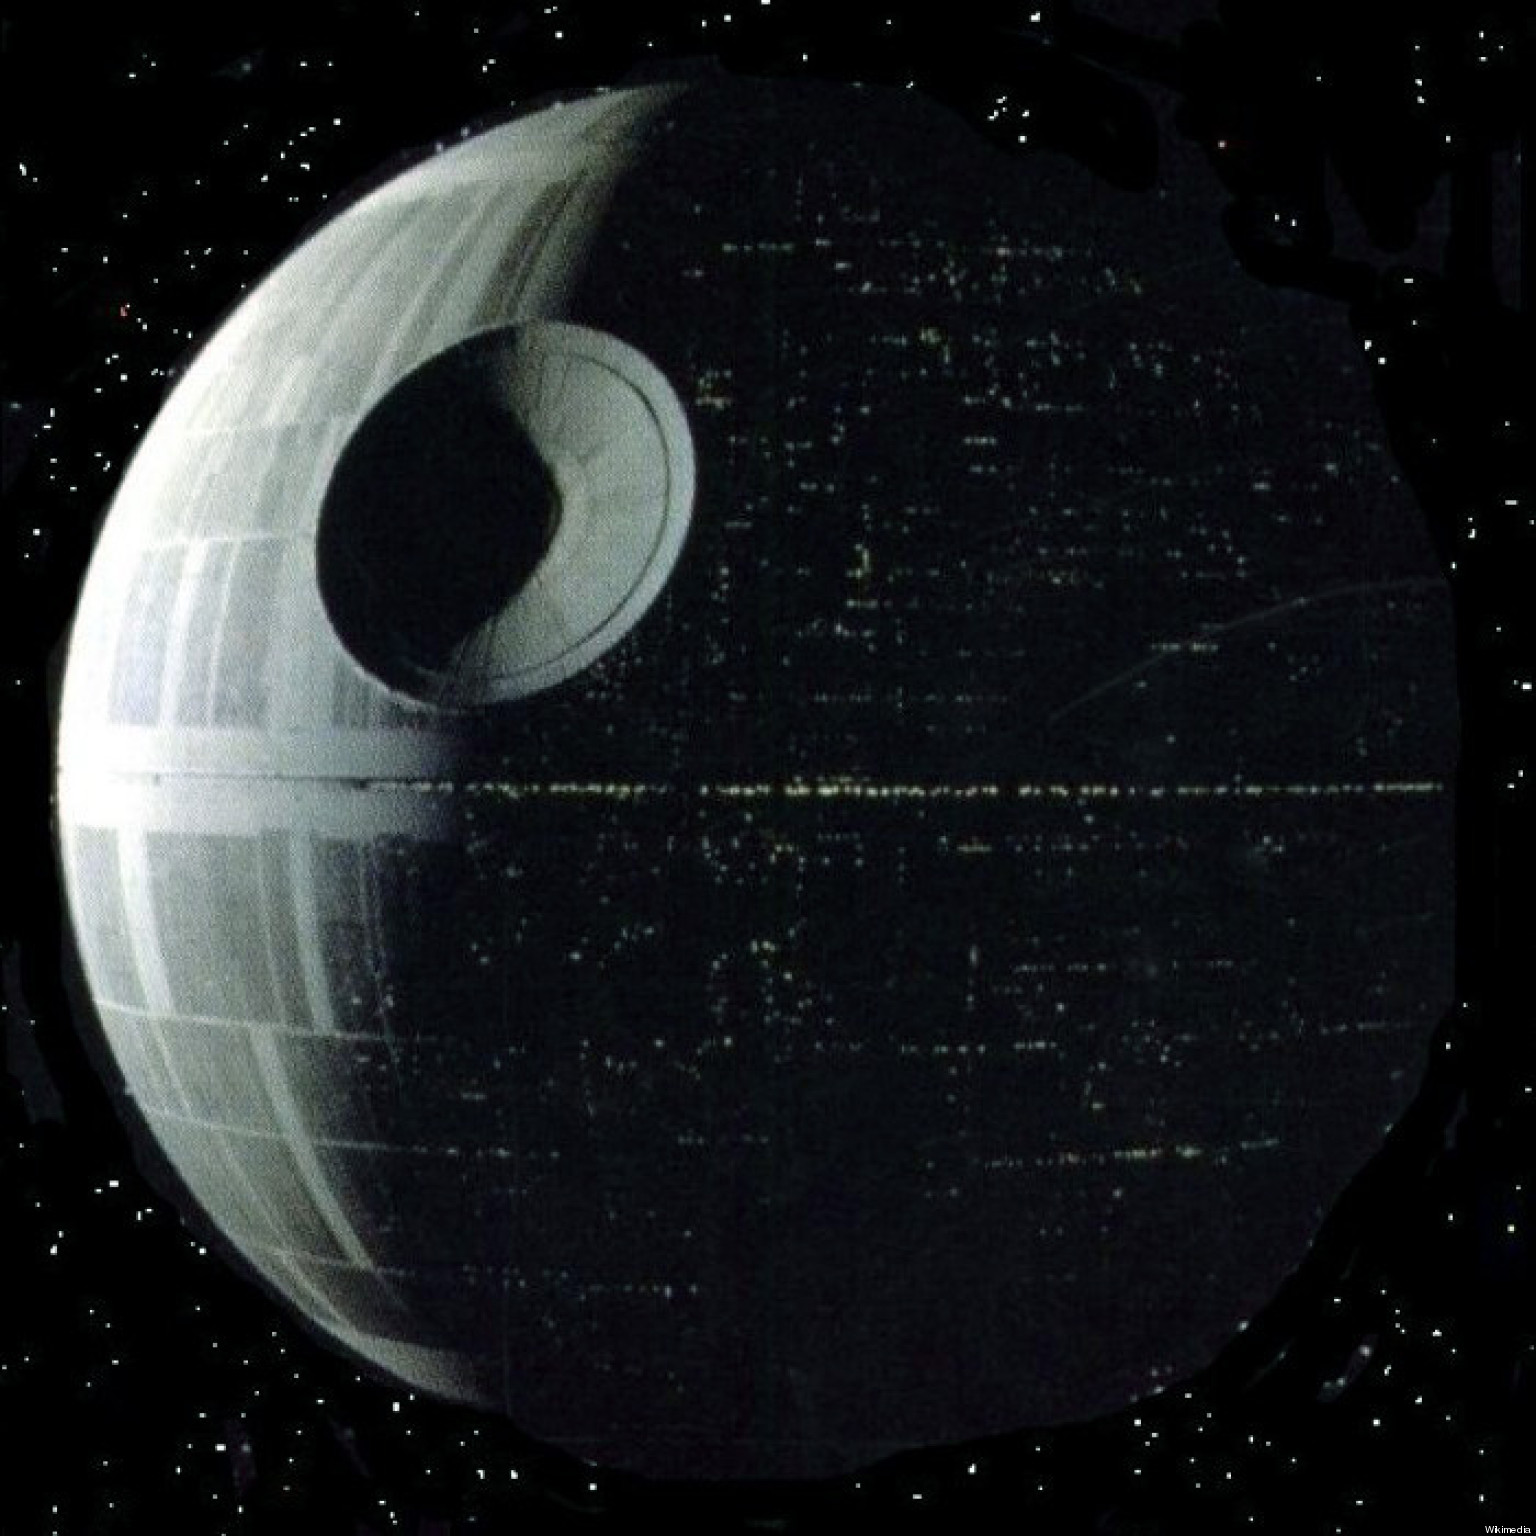 'Star Wars' Fan Site Responds To Obama Rejection Of Death Star | HuffPost